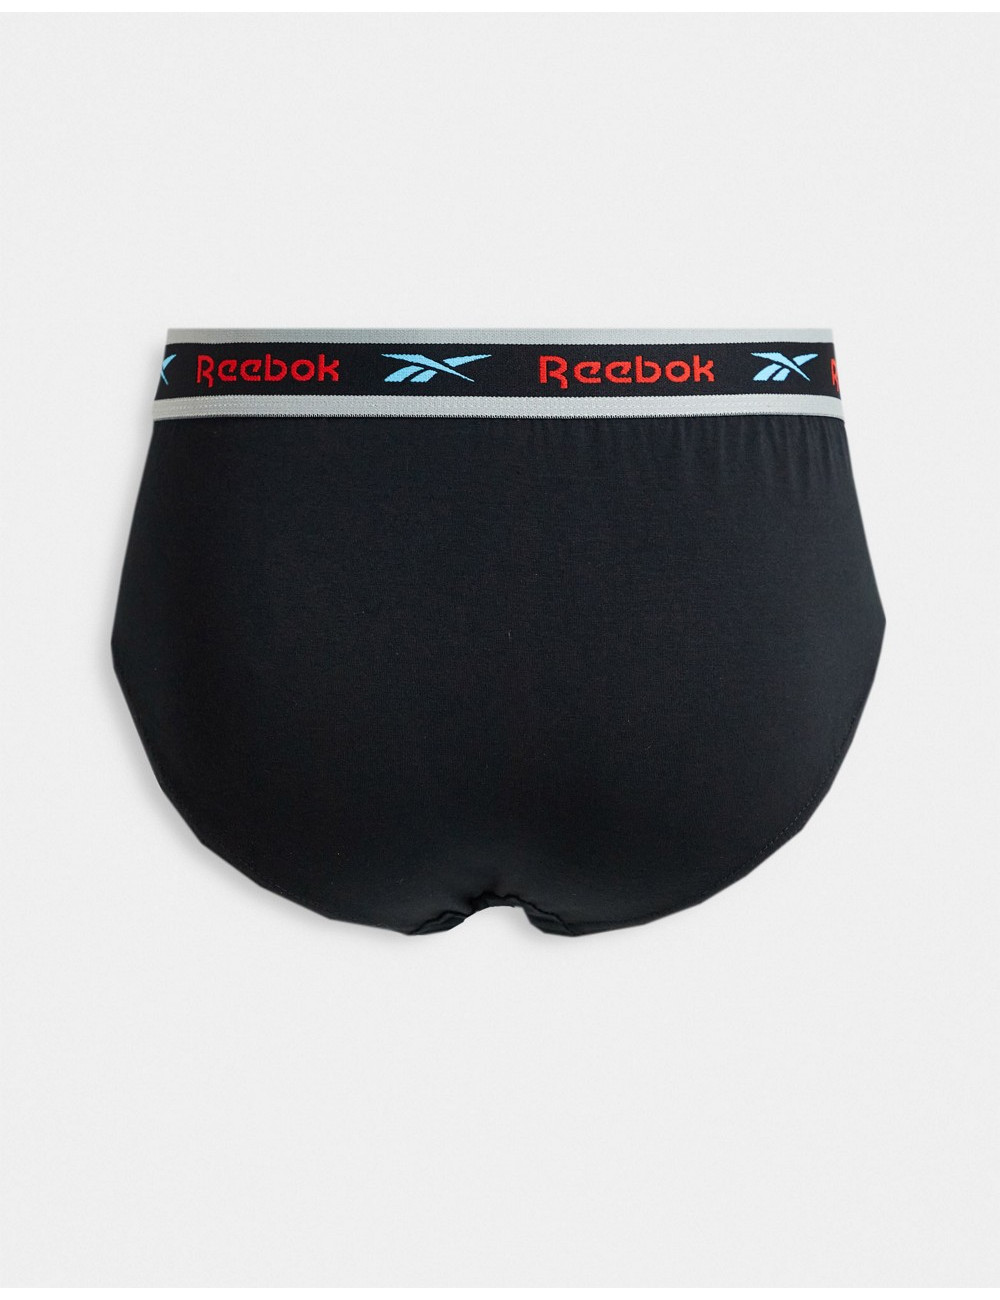 Reebok 3 pack briefs with...